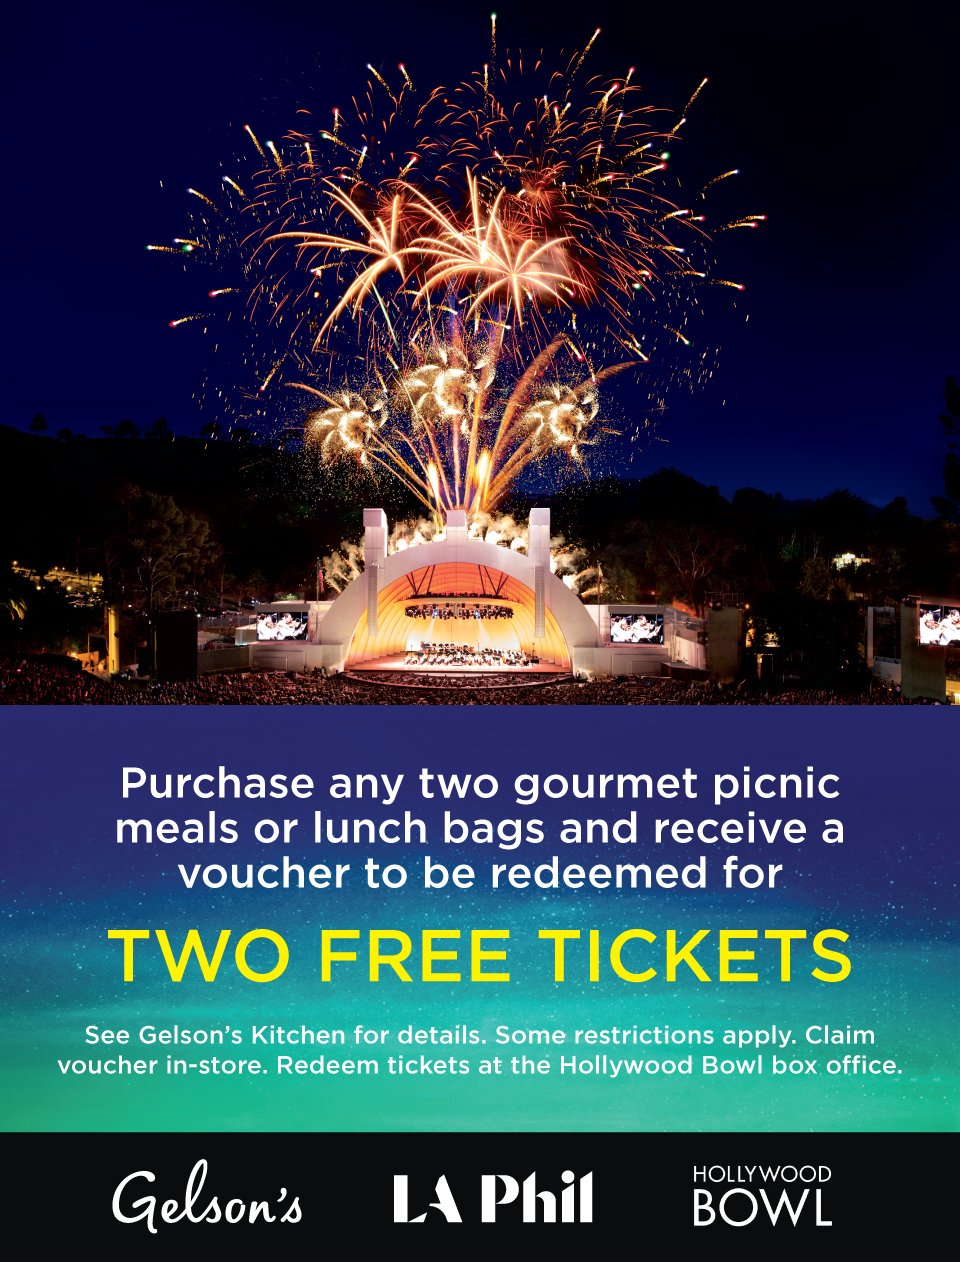 Purchase any two gourmet picnic meals or lunch bags and receive a voucher to be redeemed for TWO FREE TICKETS. See Gelson's Kitchen for details. Some restrictions apply. Voucher redeemable in-store only.